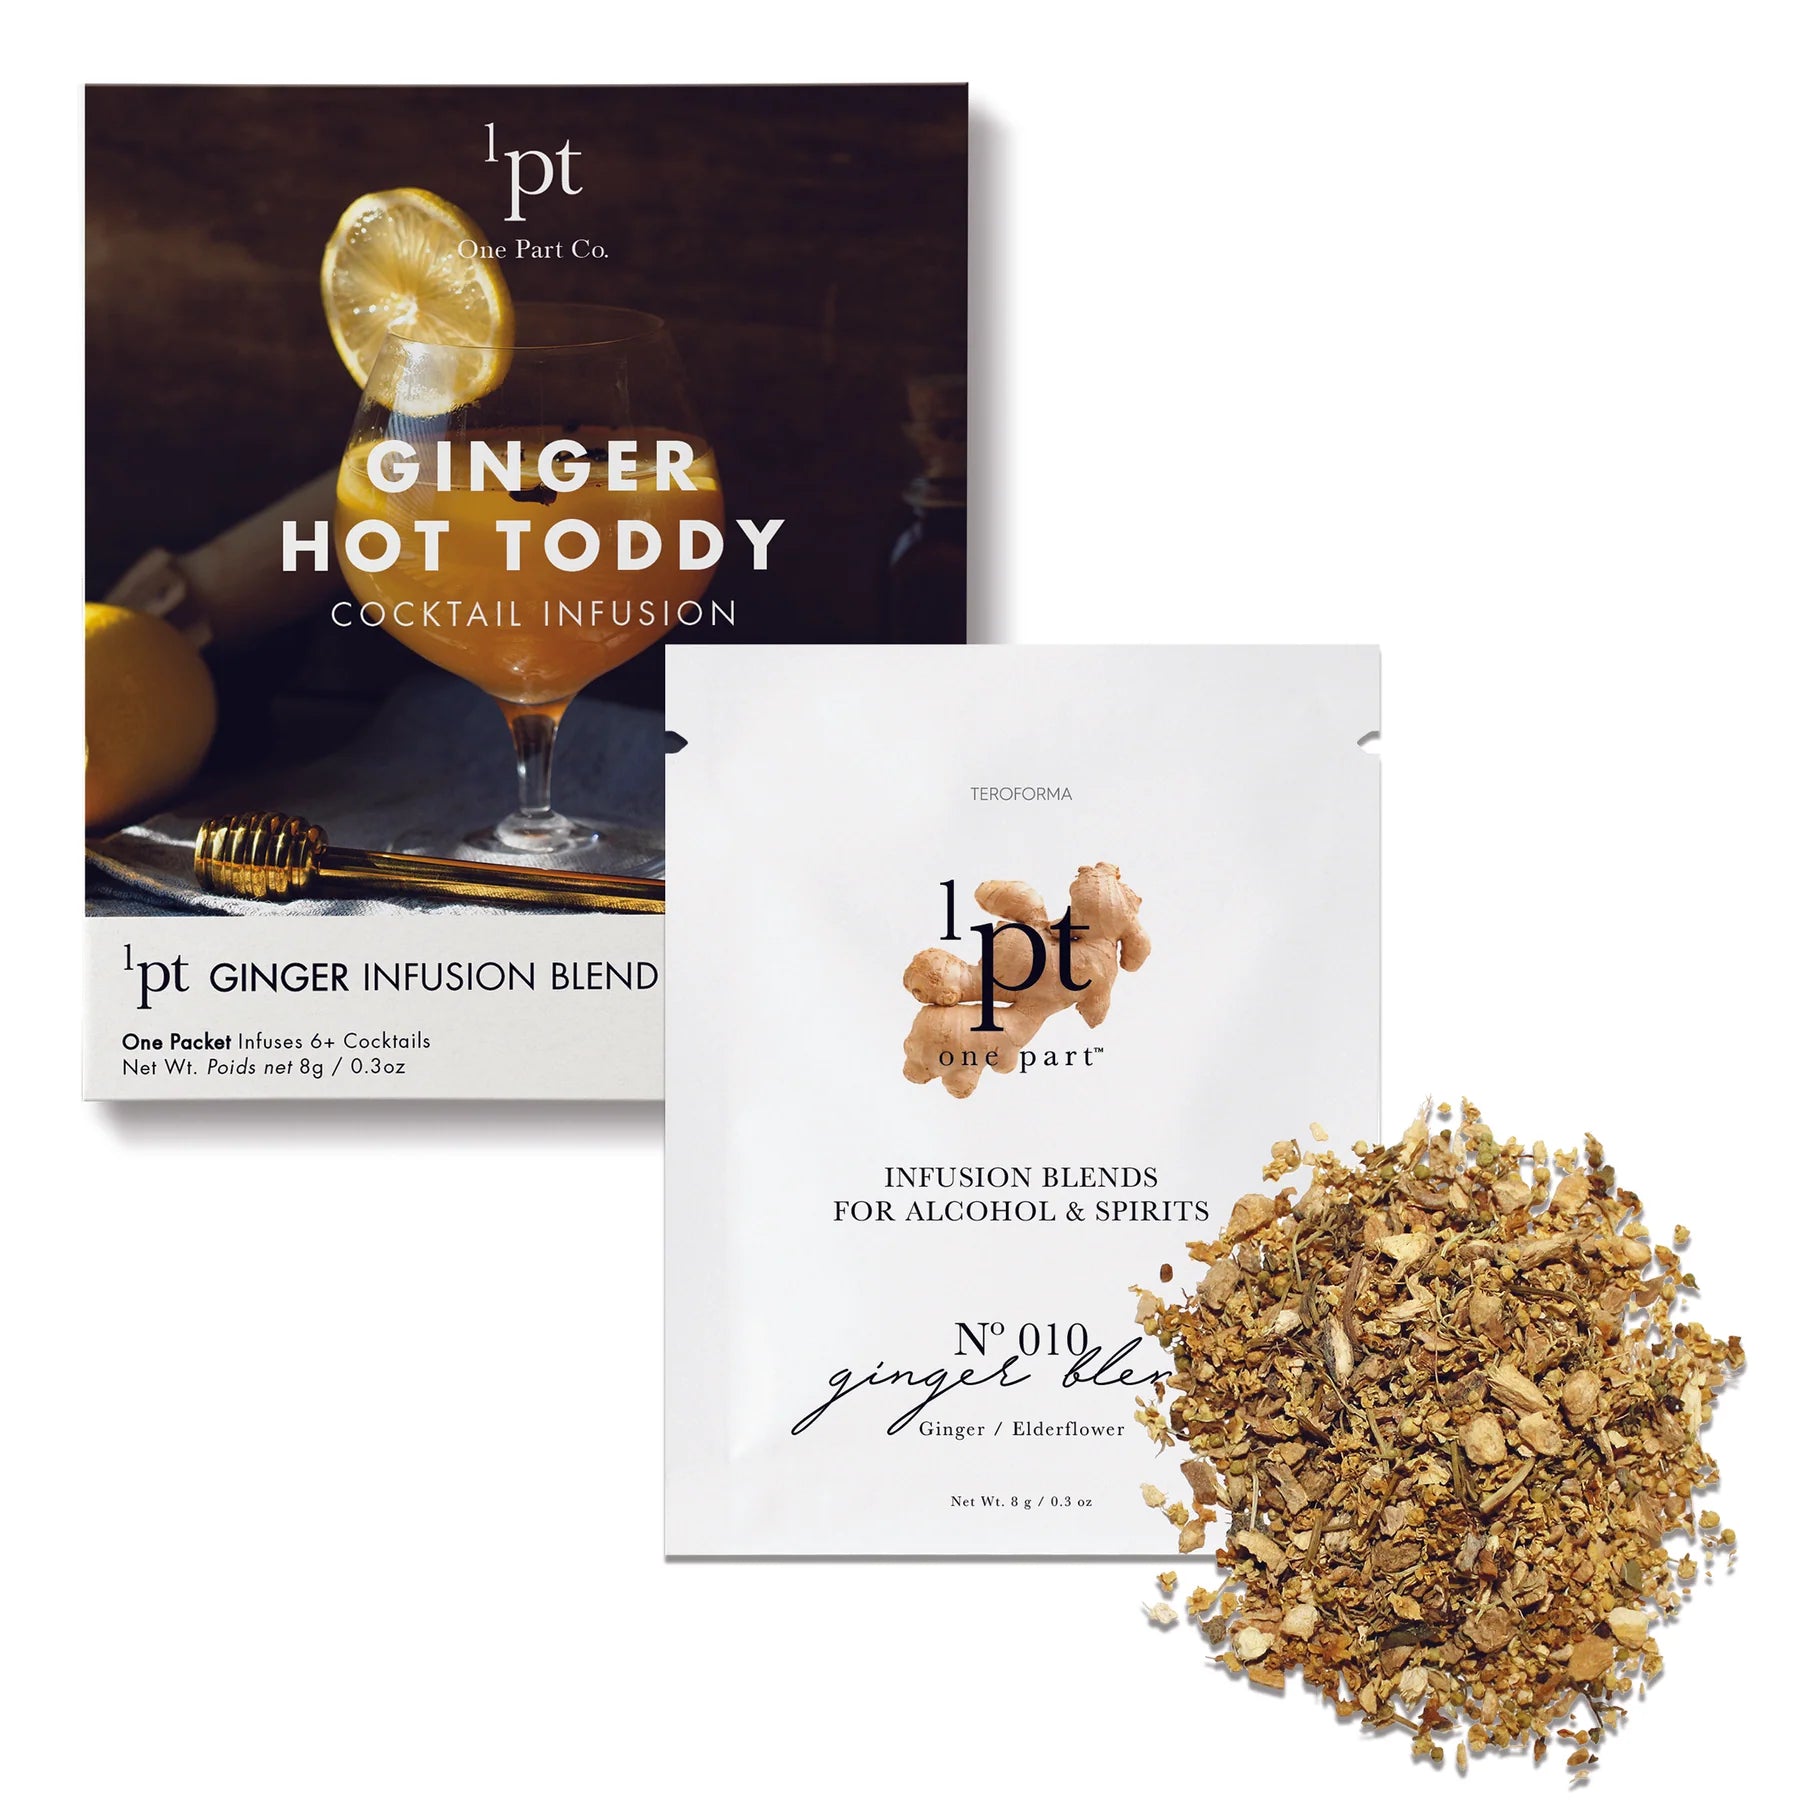 Ginger Hot Toddy Cocktail Infusion Kit